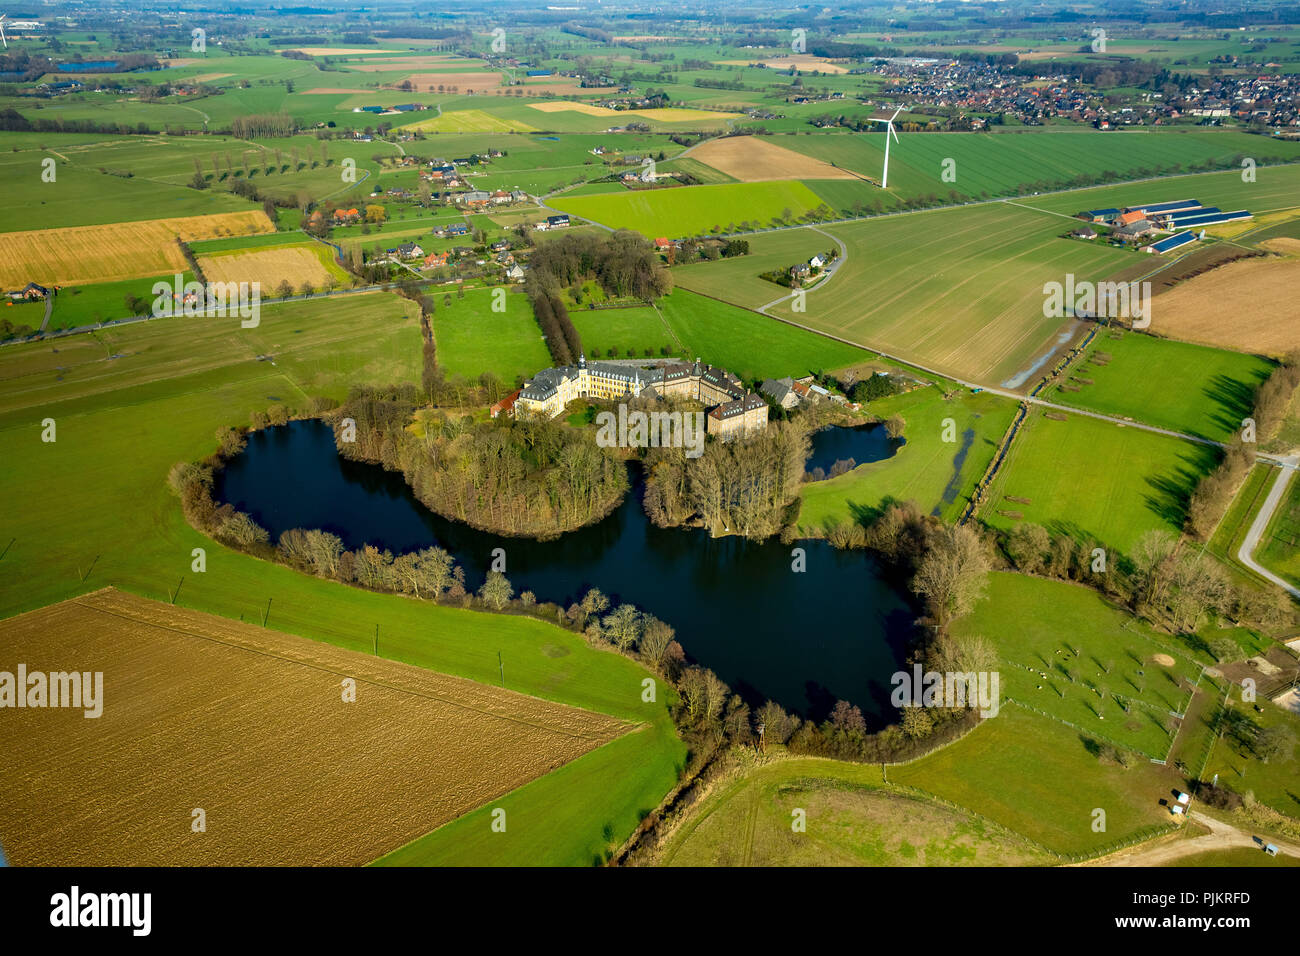 Wild geese in the nature reserve at Haus Aspel, Aspeler Meer, quarry ponds with turquoise water, Rees, Lower Rhine, North Rhine-Westphalia, Germany Stock Photo